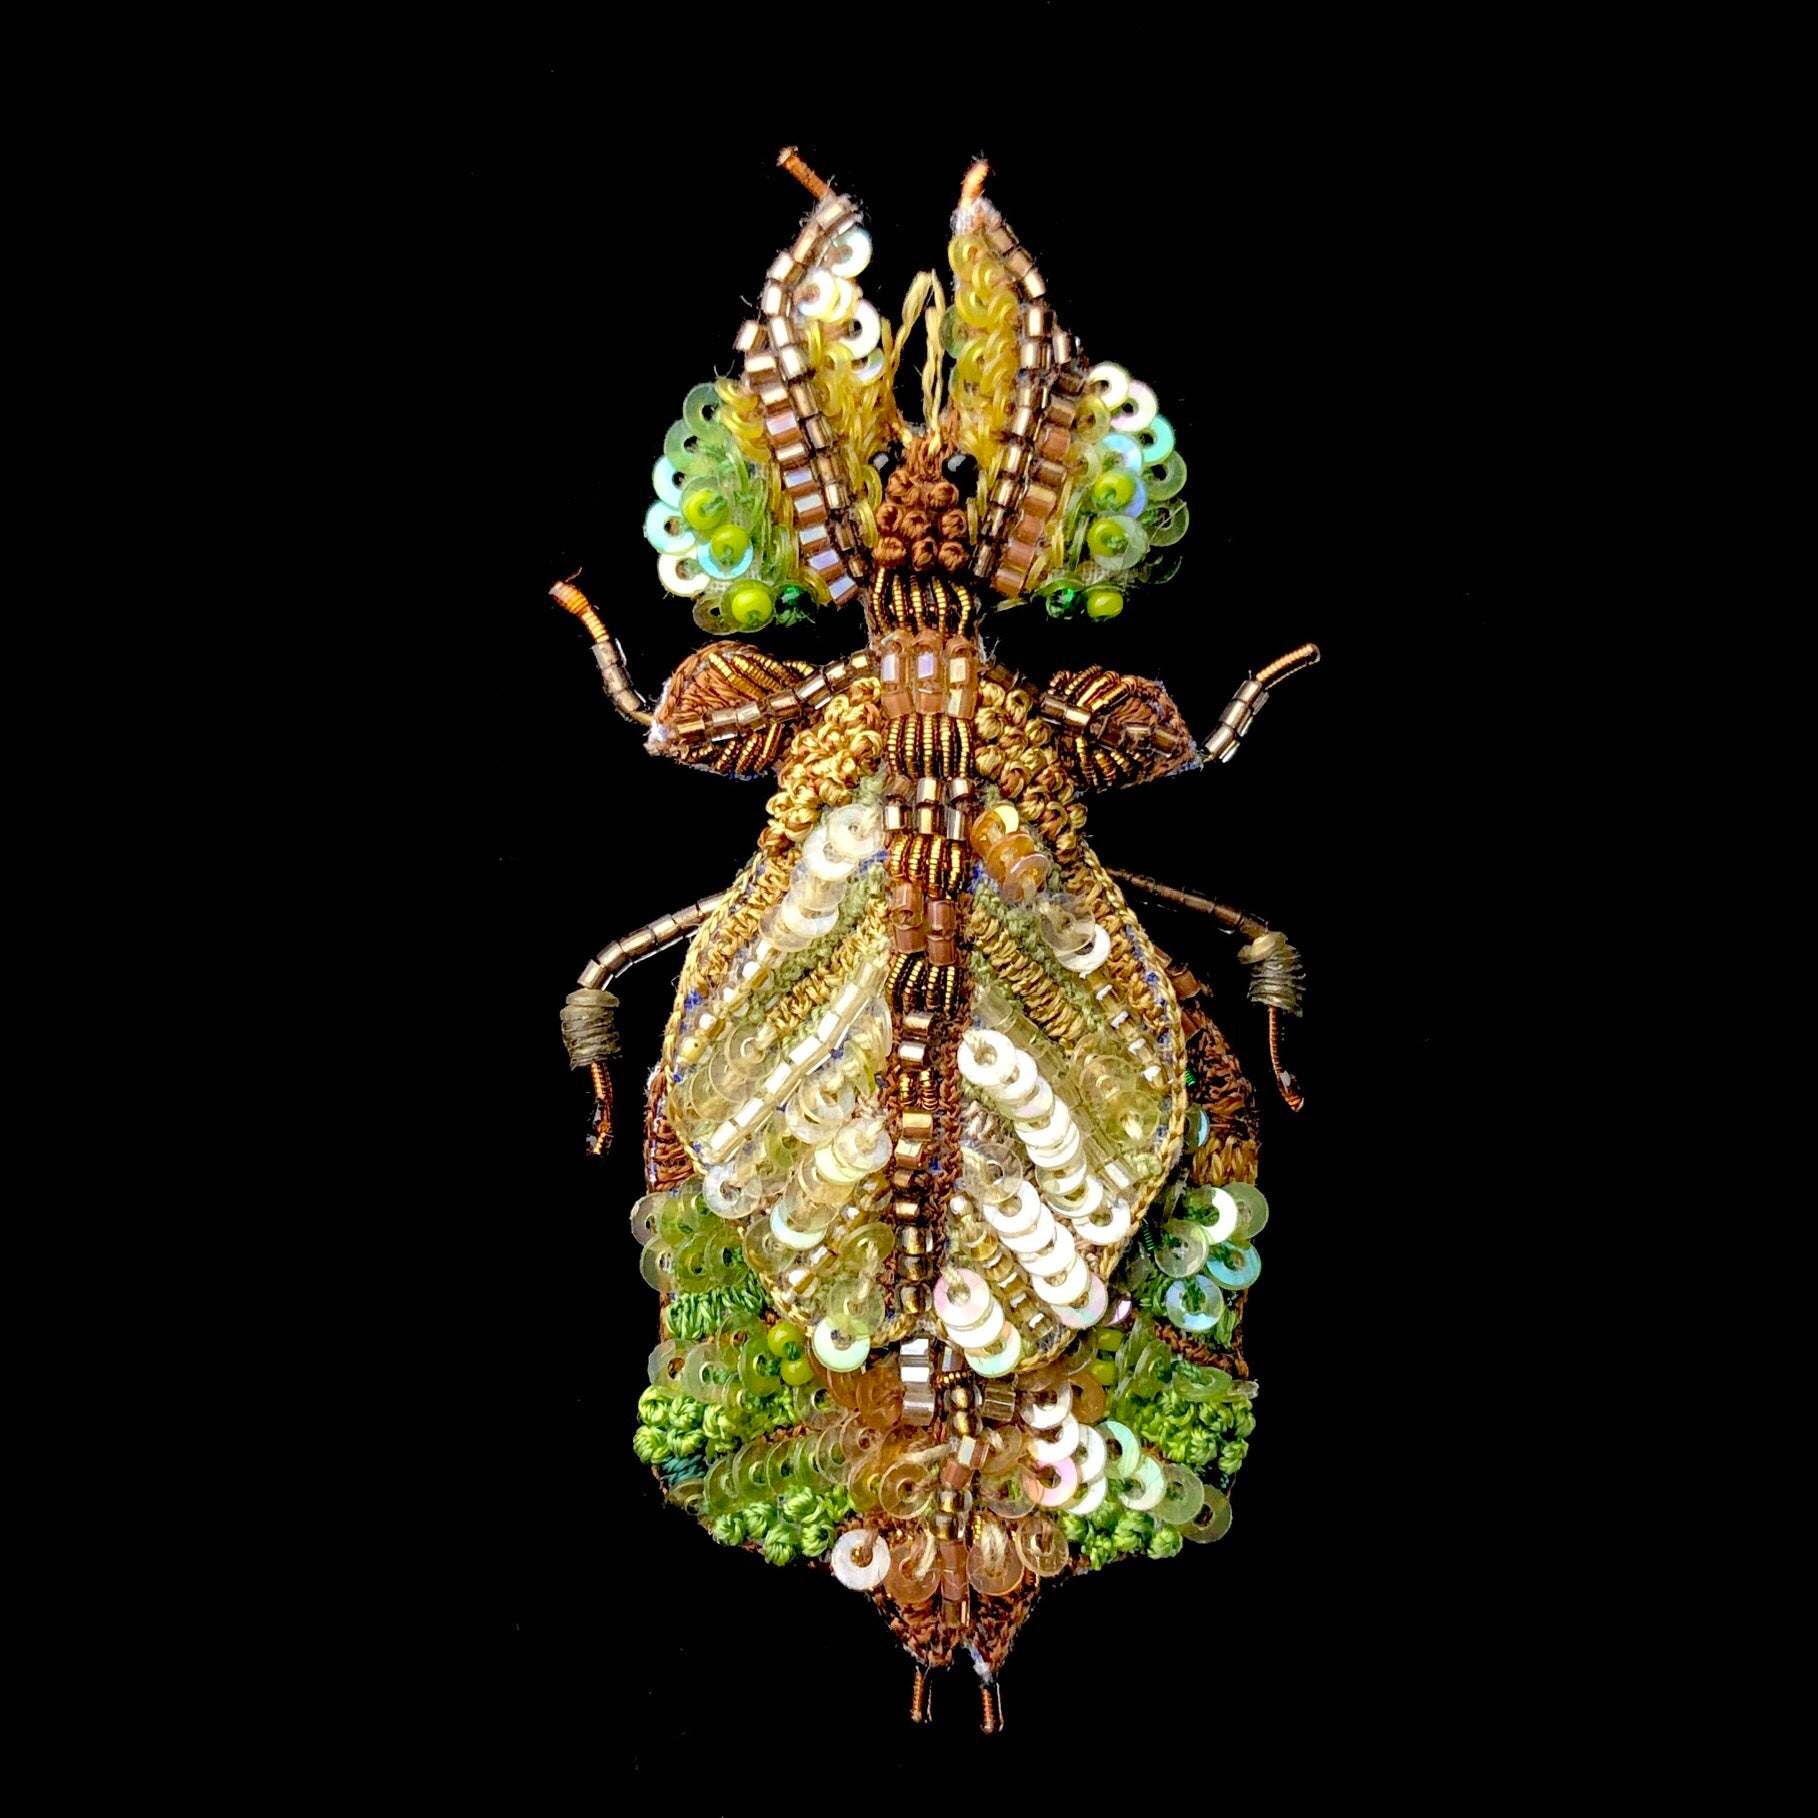 Embroidered Leaf Bug with green, brown and yellow reflective beads